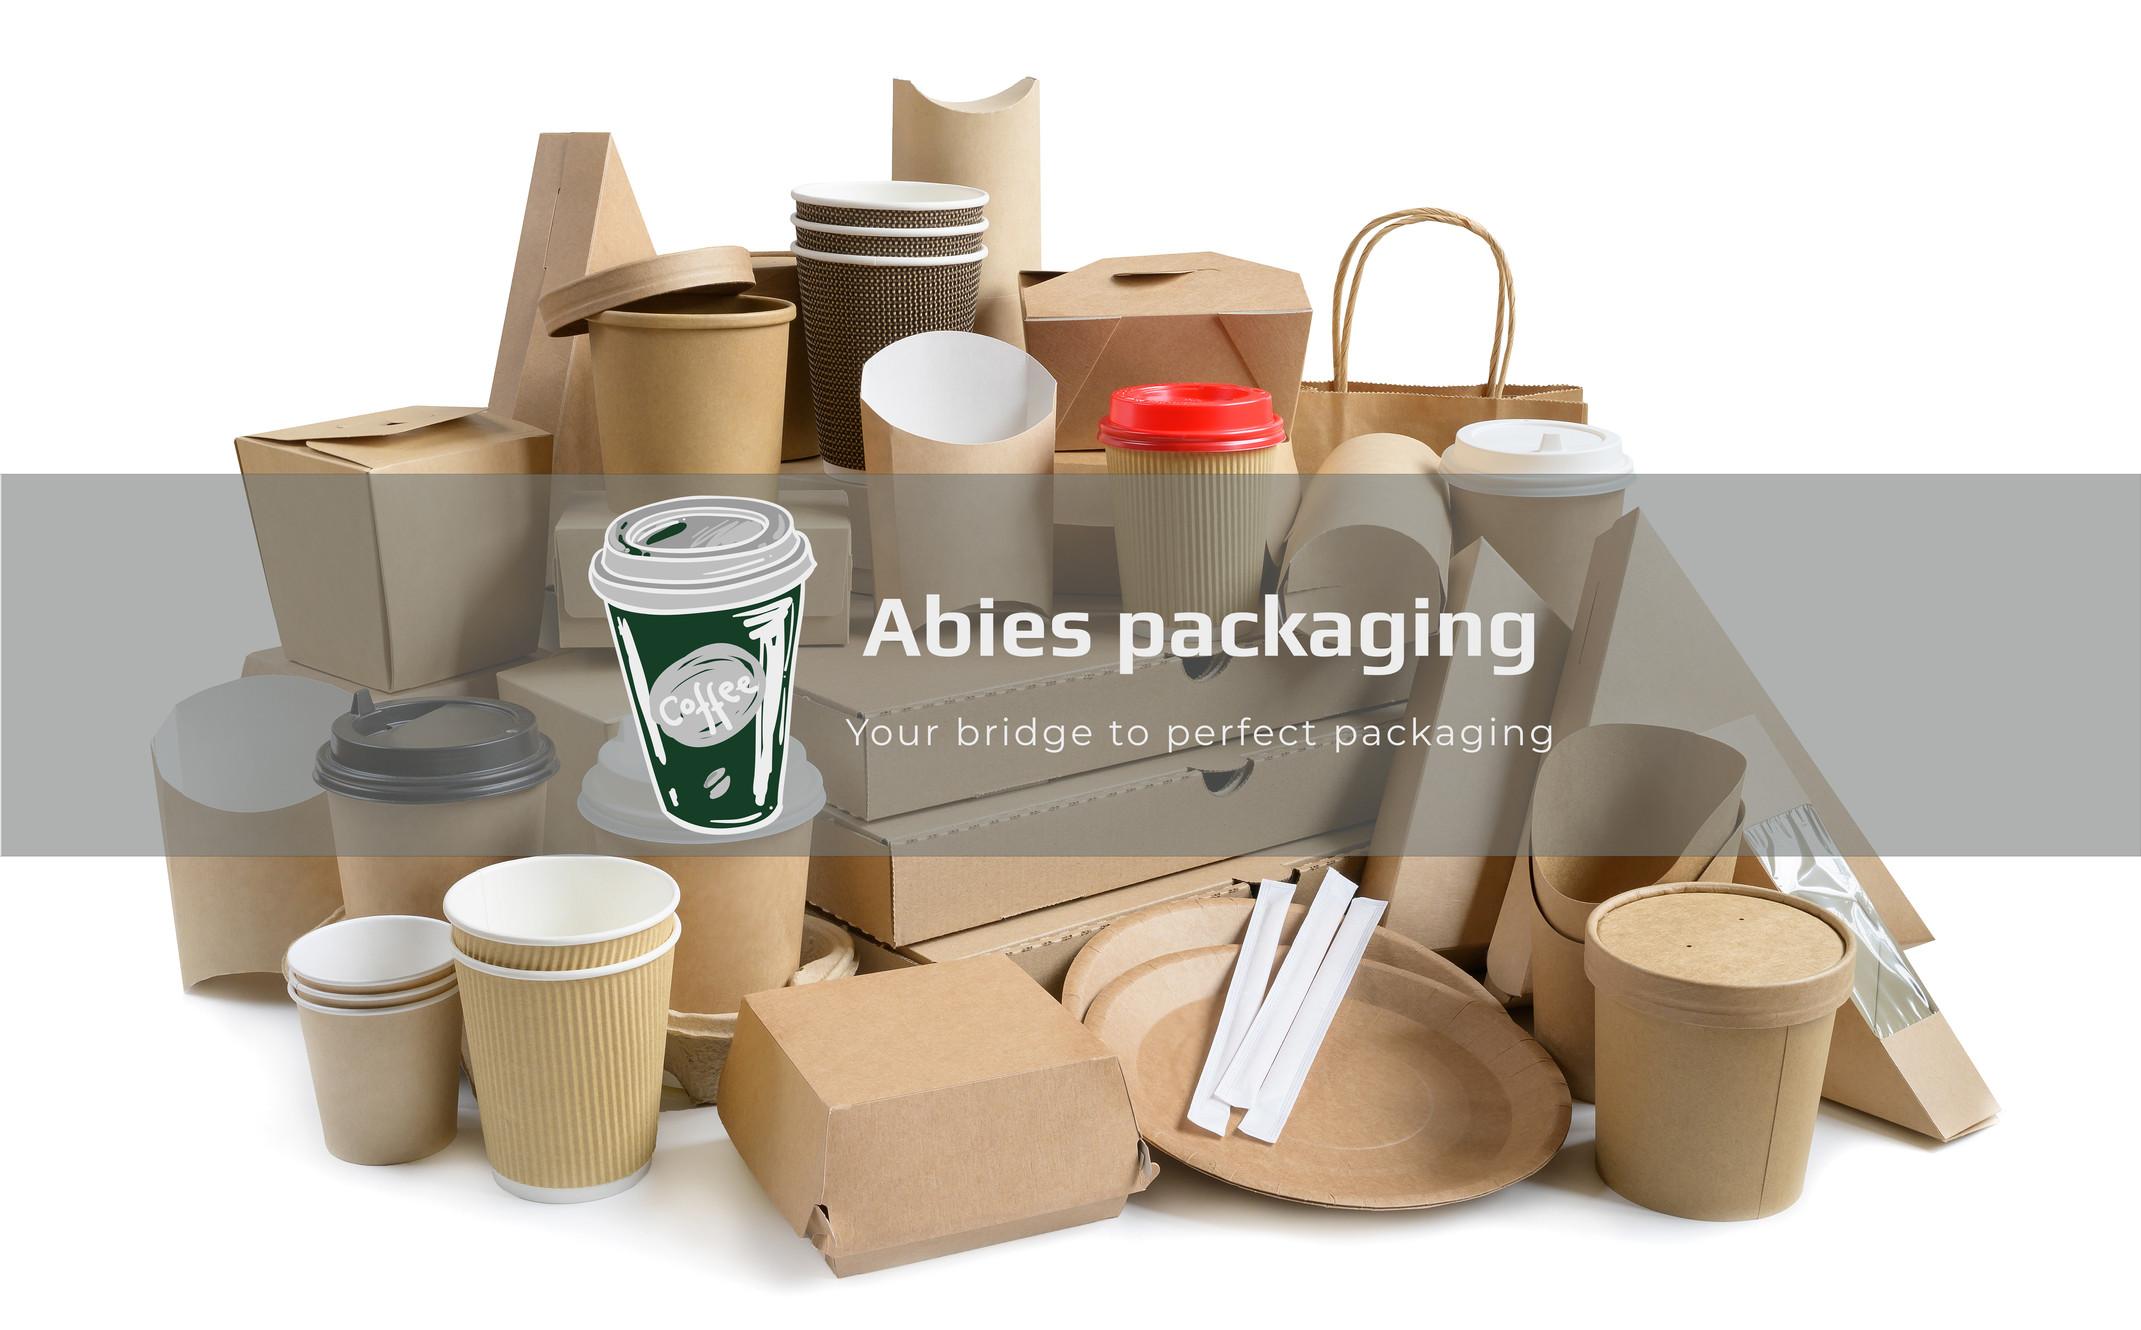 Product Products | Abies packaging image